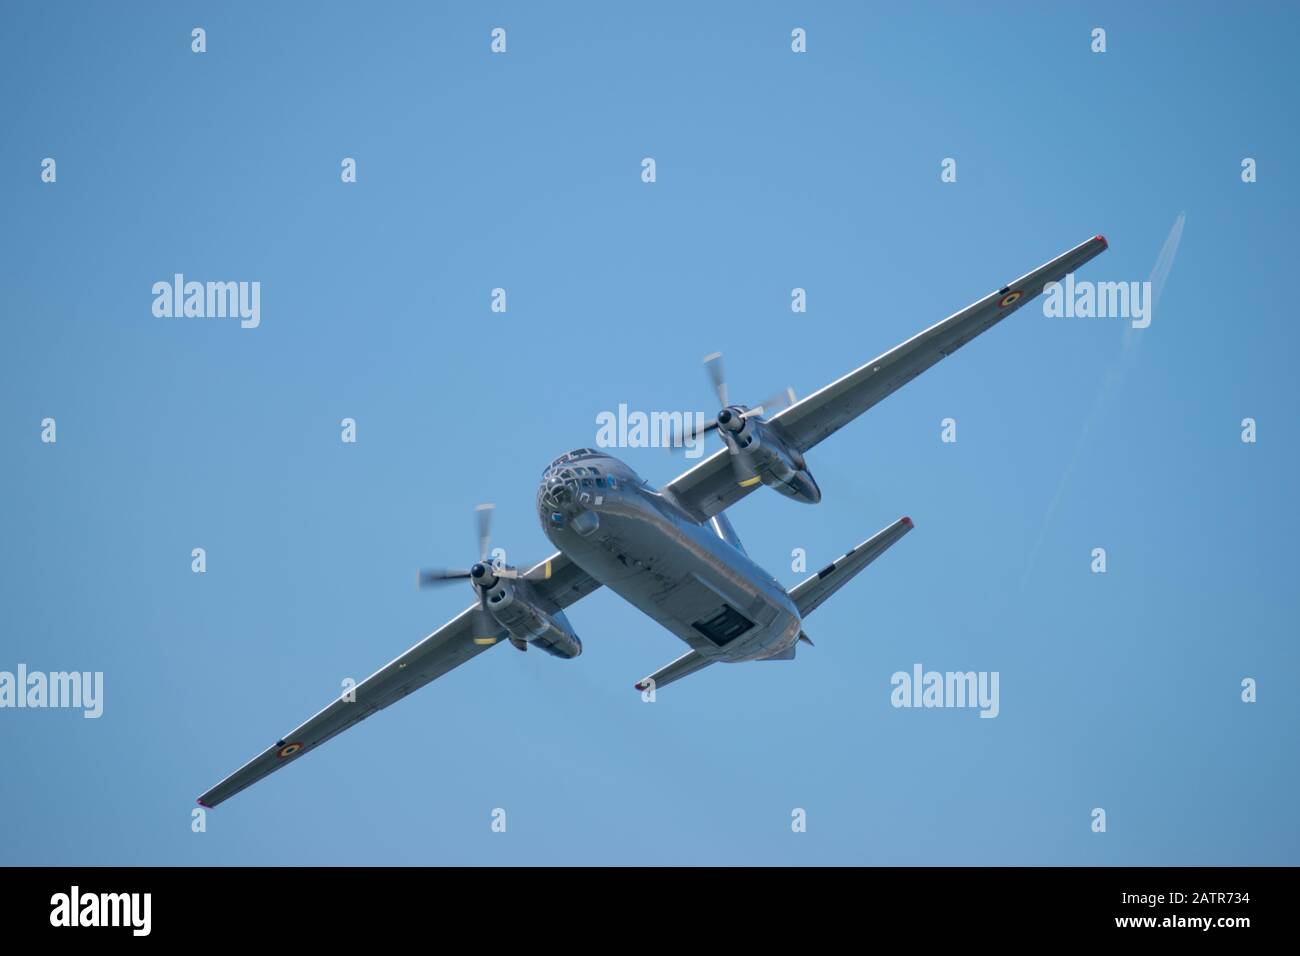 Bucharest/ Romania - AeroNautic Show - September 21, 2019: AN30 military airplane flying in the sky. Stock Photo